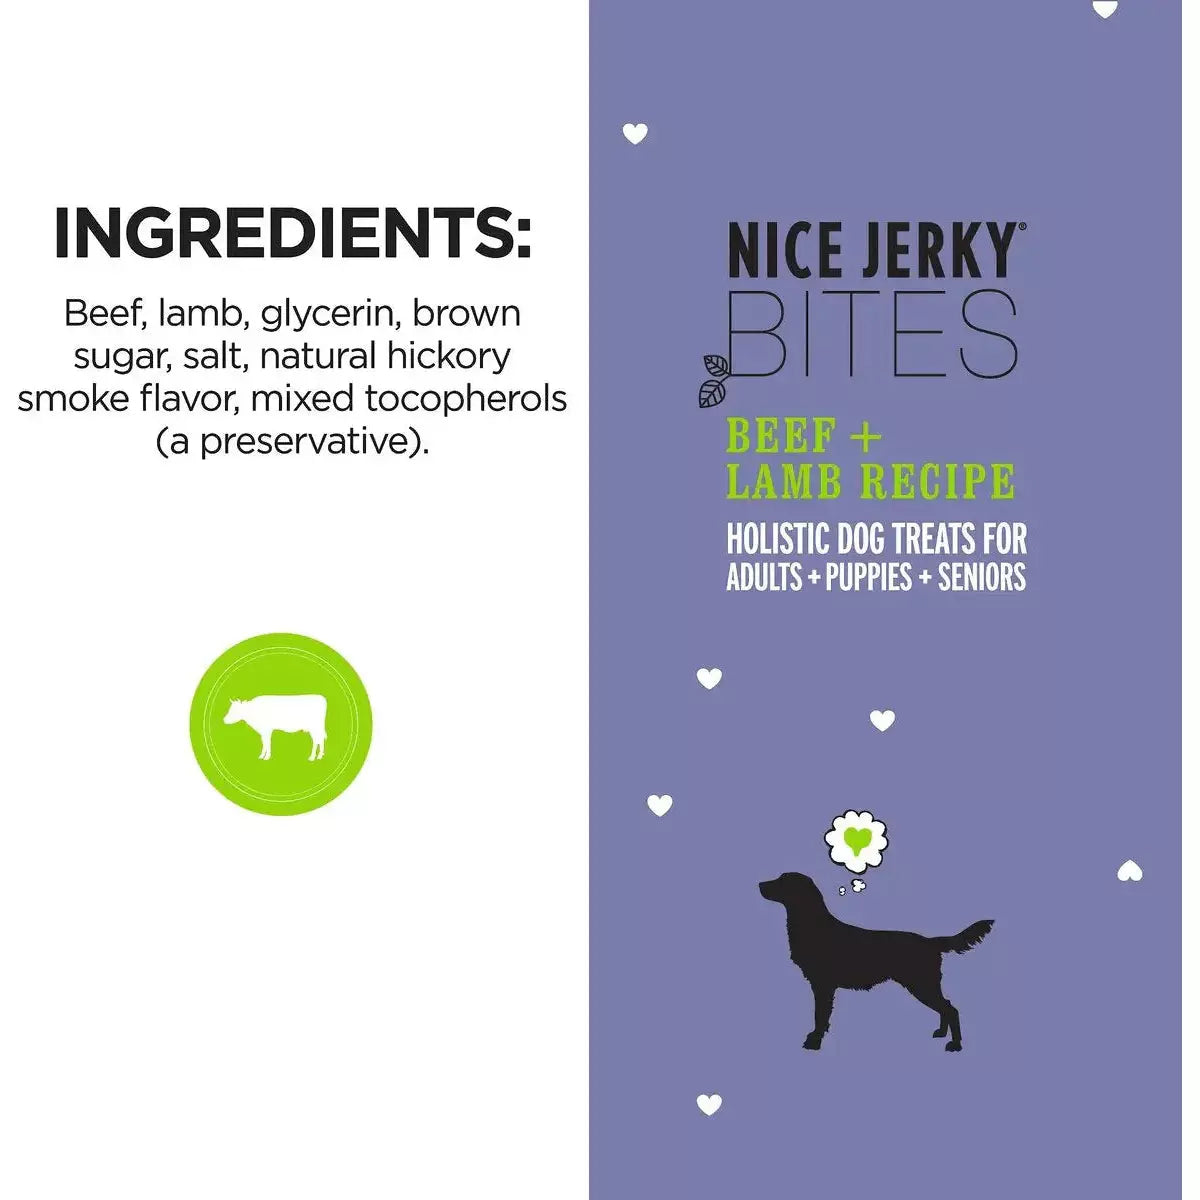 I and Love and You Nice Jerky Bites Grain-Free Dog Treats I and Love and You